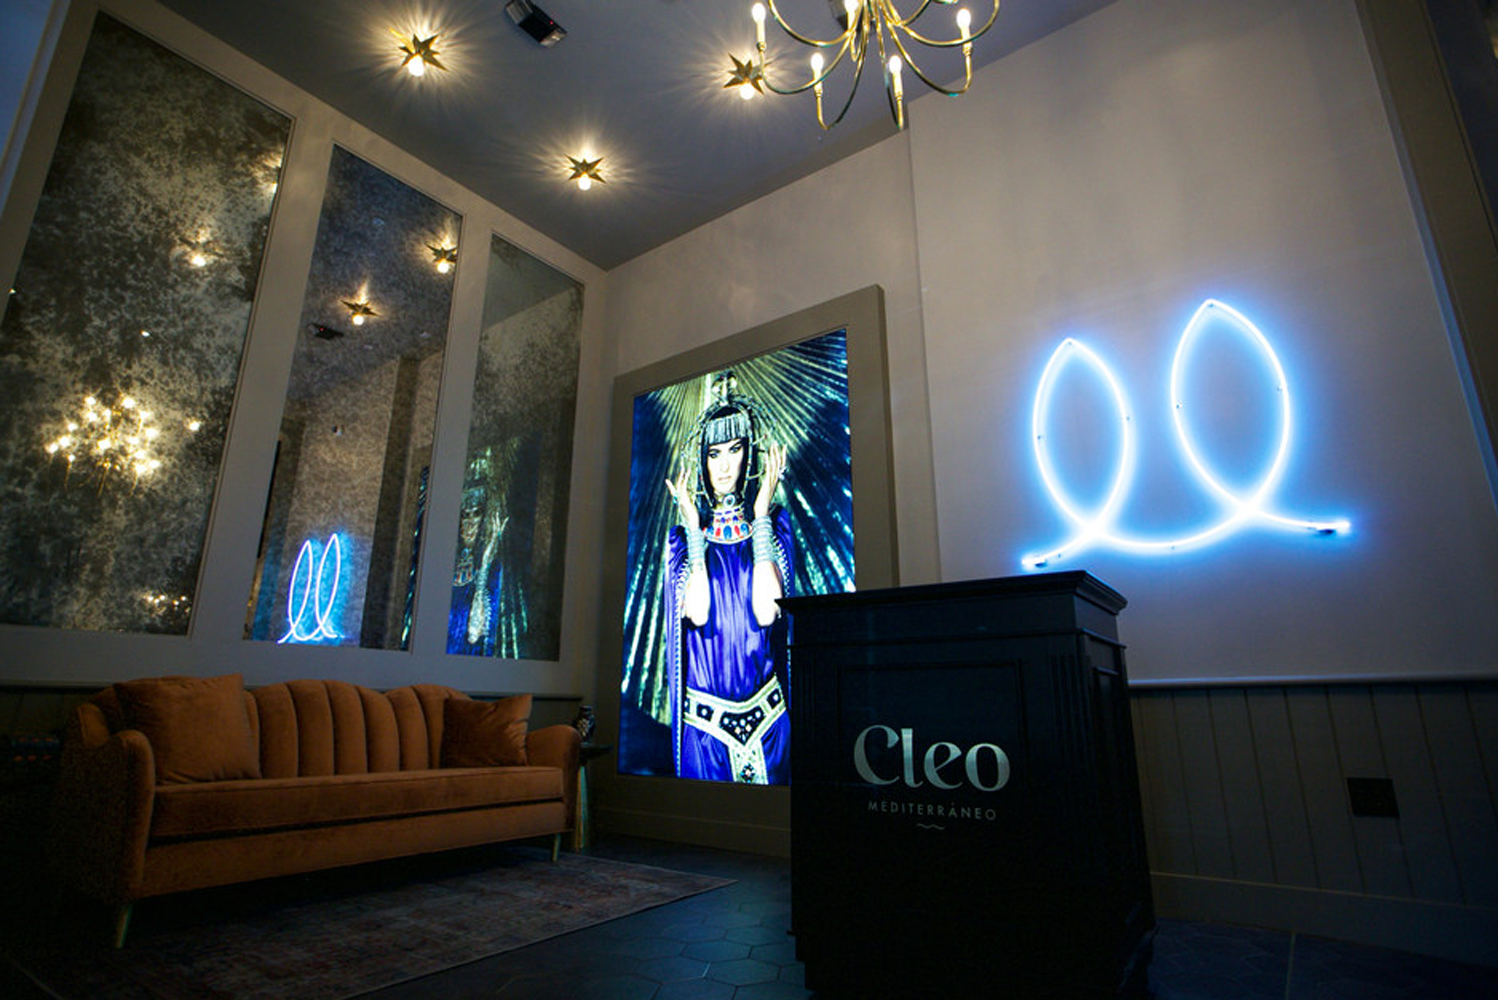 SBE reopened Cleo Mediterrneo Hollywood the second location in Los Angeles of the culinary concept from SBEs Disruptive G